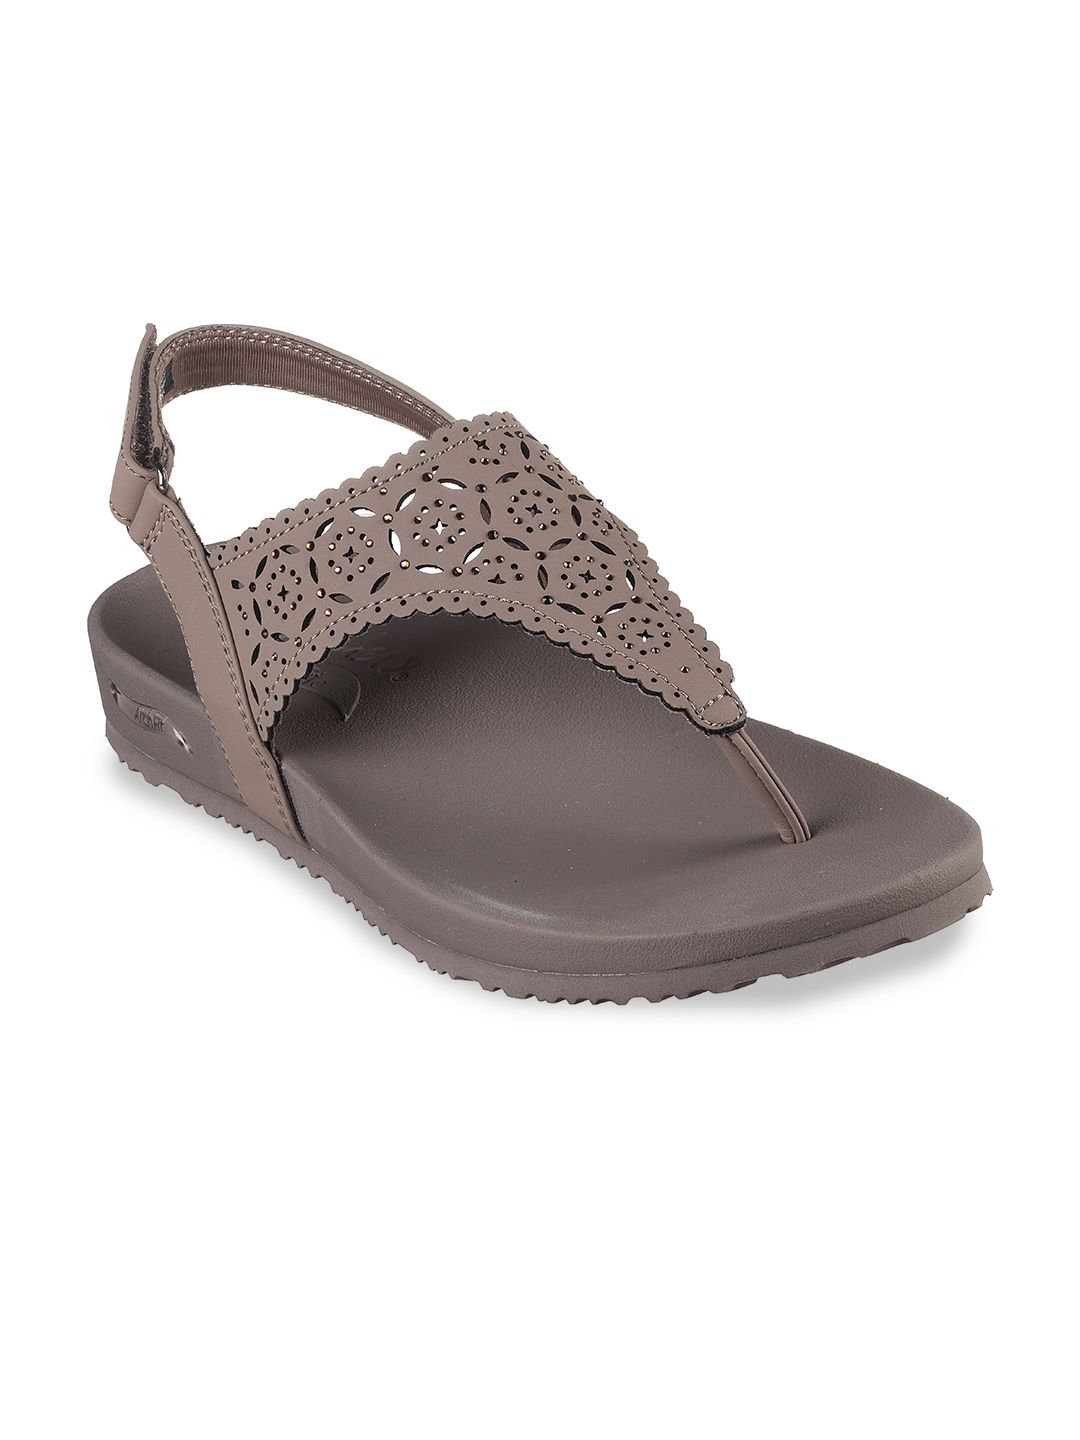 Skechers Women ARCH FIT MEDITATION - SOPHIE  Open Toe Flats With Laser Cuts Price in India